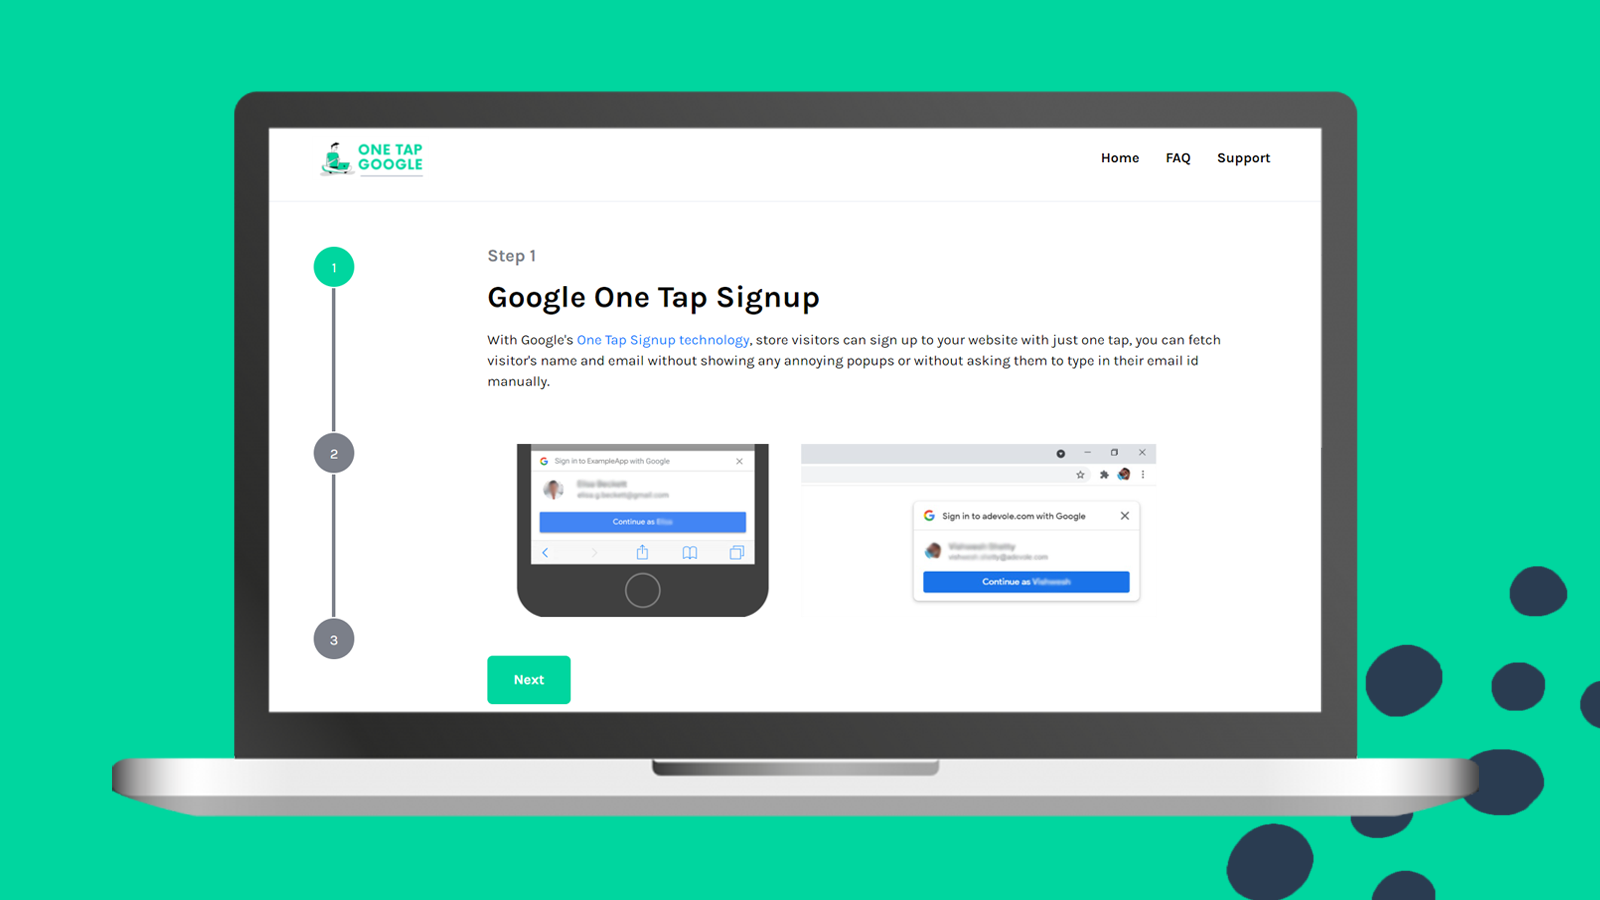 Step 1 - Understand what Google one tap Signup is